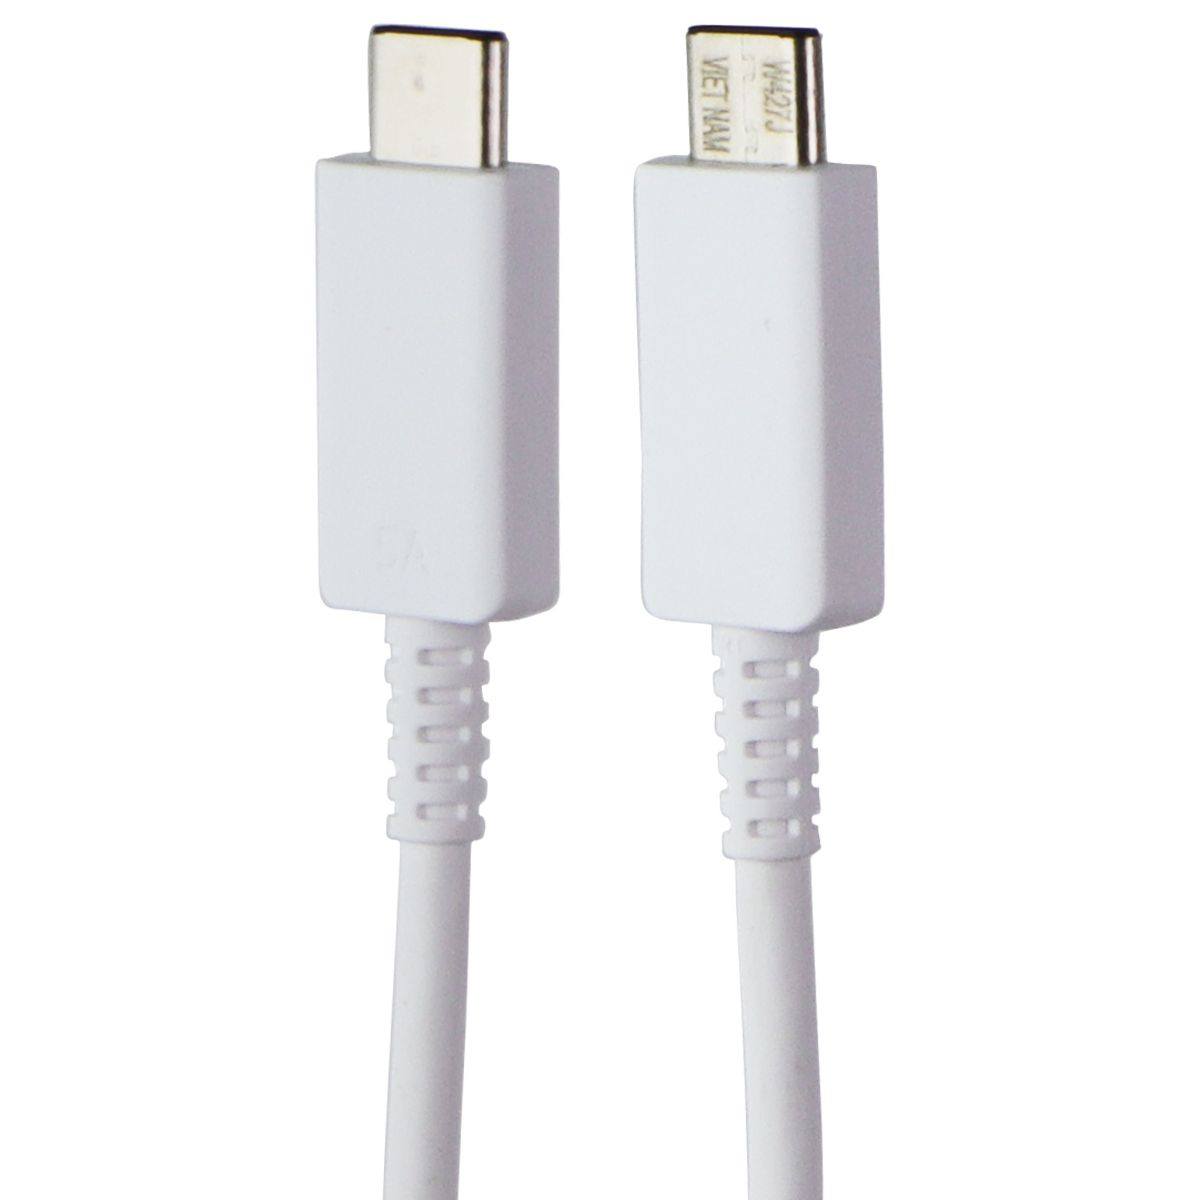 Samsung USB-C to USB-C Cable 1.8 meter 5A - White Cell Phone - Cables & Adapters Samsung    - Simple Cell Bulk Wholesale Pricing - USA Seller